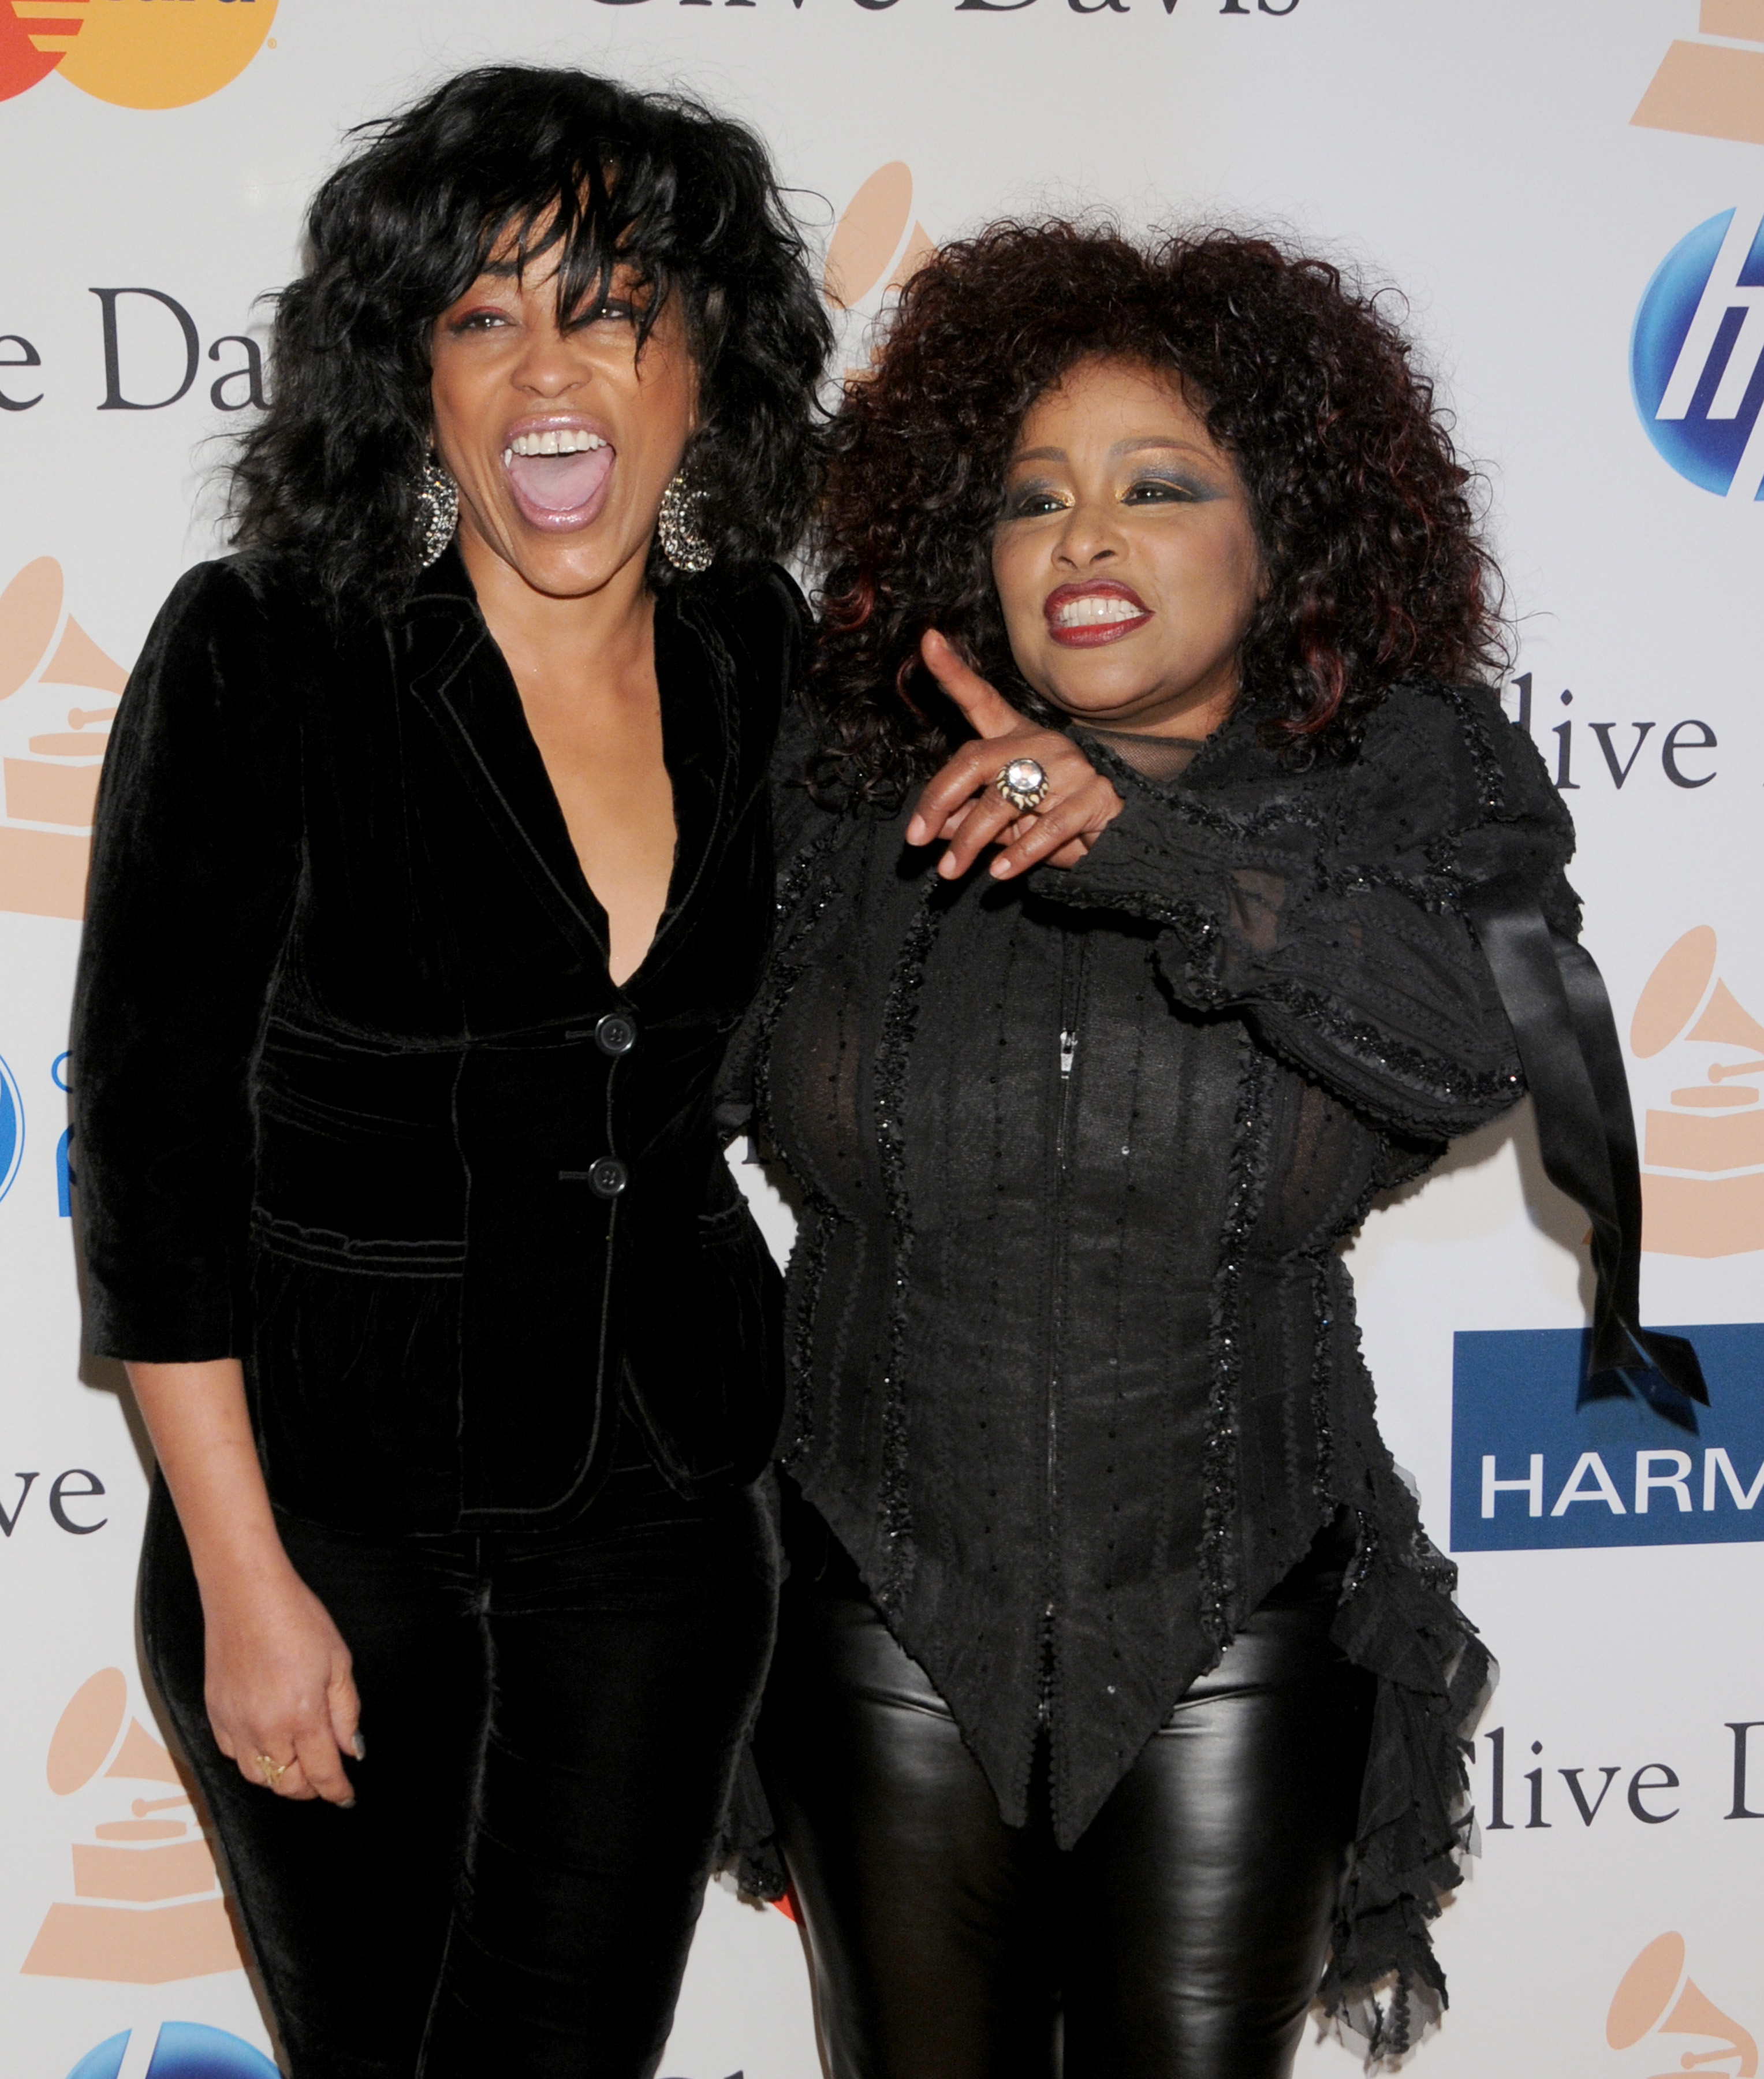 BEVERLY HILLS, CA - FEBRUARY 12: Chaka Khan and Miki Howard arrive at the Clive Davis and The Recording Acedemy's Annual Pre-Grammy Gala held at the Beverly Hilton Hotel on February 12, 2011 in Beverly Hills, California. (Photo by Gregg DeGuire/FilmMagic)